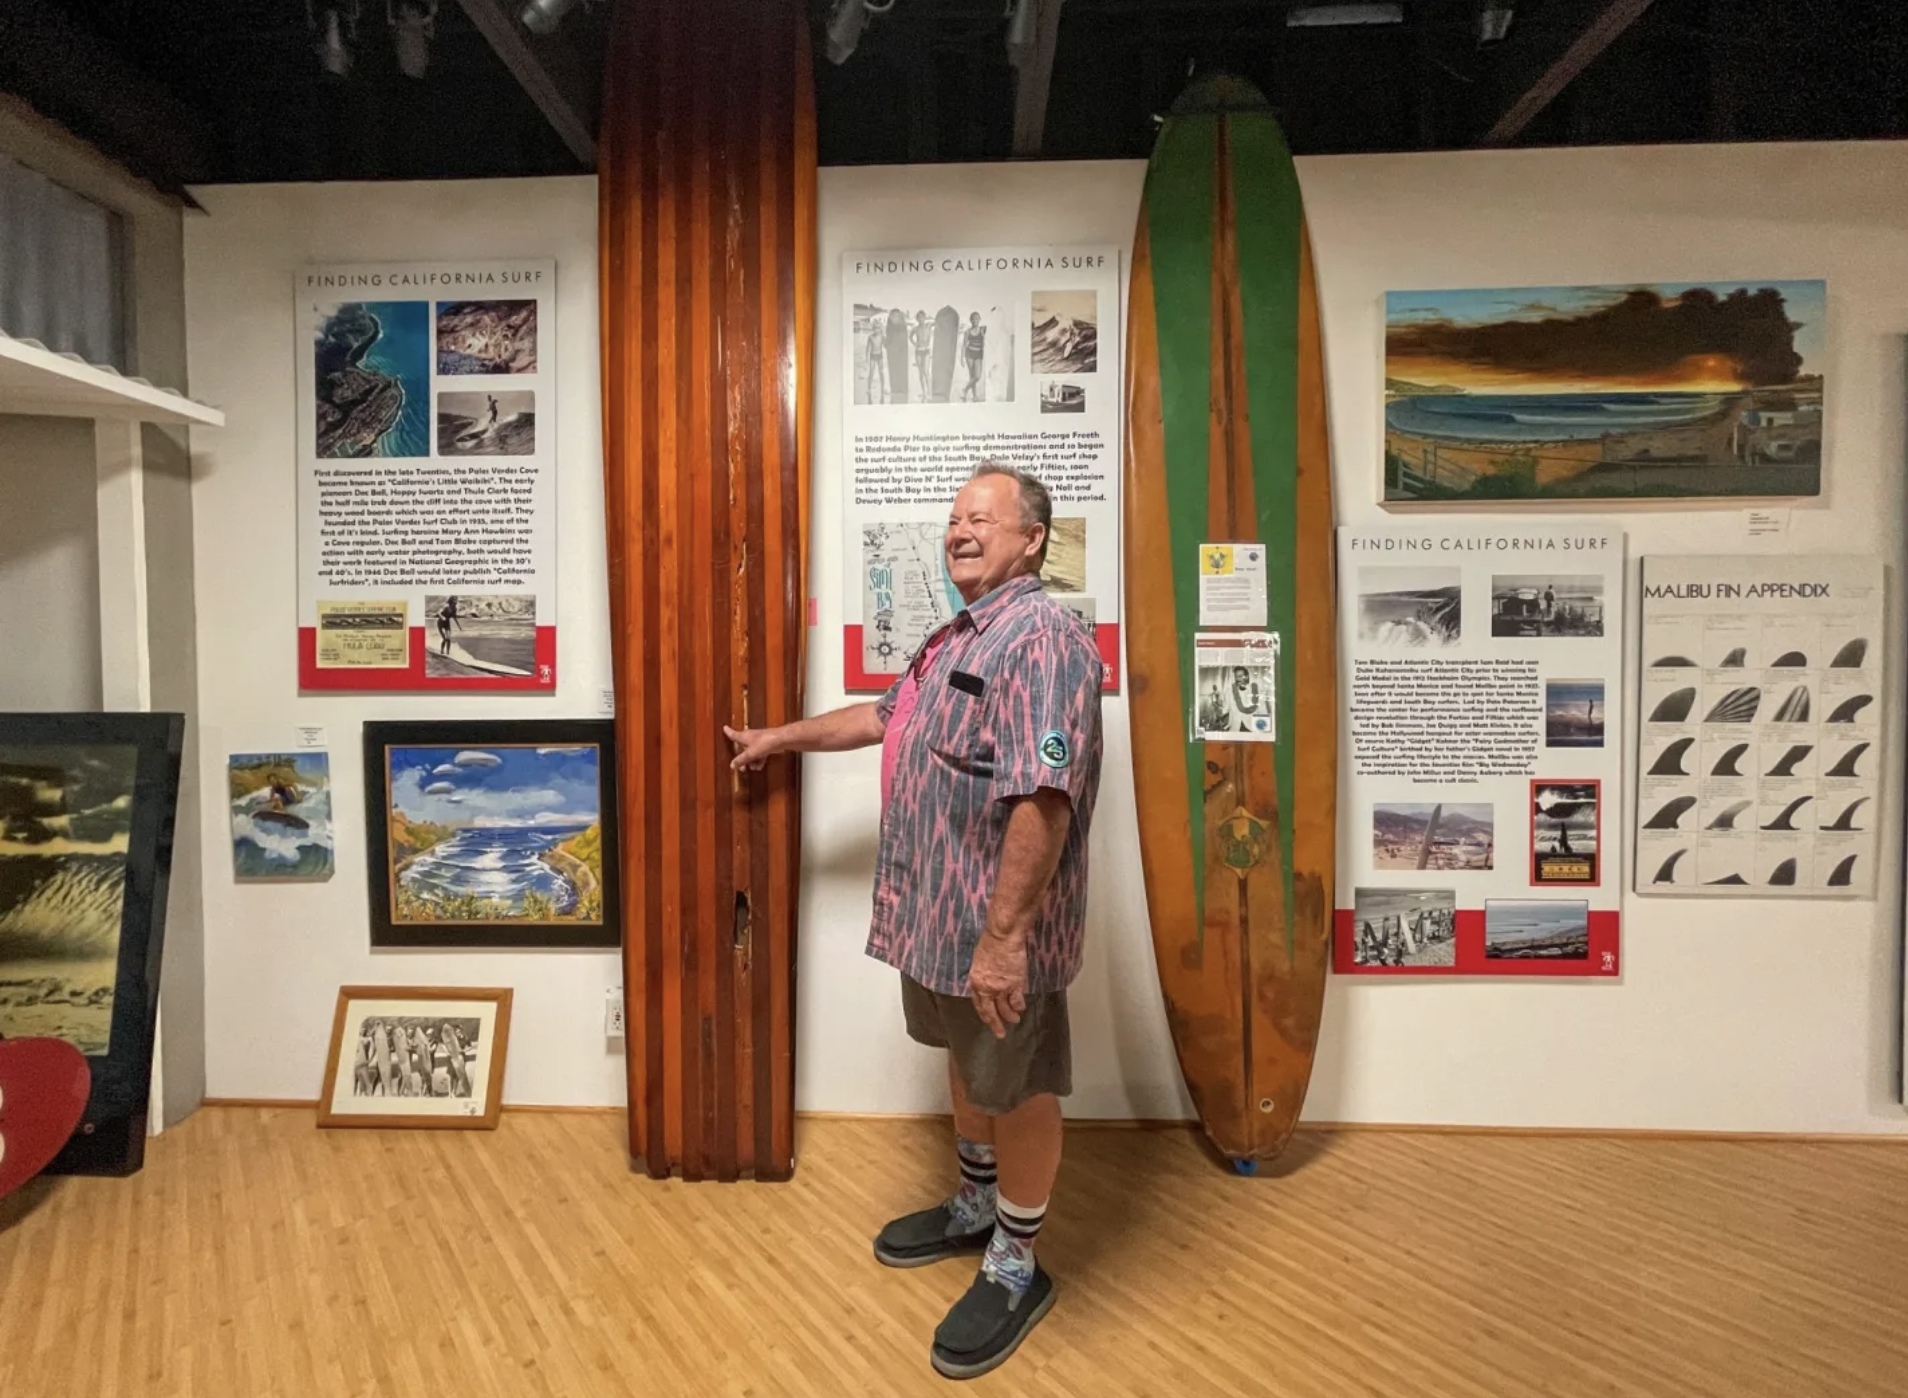 PT Townend shows off some historic wooden surfboards that are part of a new exhibit exploring California surf breaks and the history of how they were discovered at the Huntington Beach International Surfing Museum in Huntington Beach, CA, on Tuesday, November 30, 2021. (Photo by Jeff Gritchen, Orange County Register/SCNG)